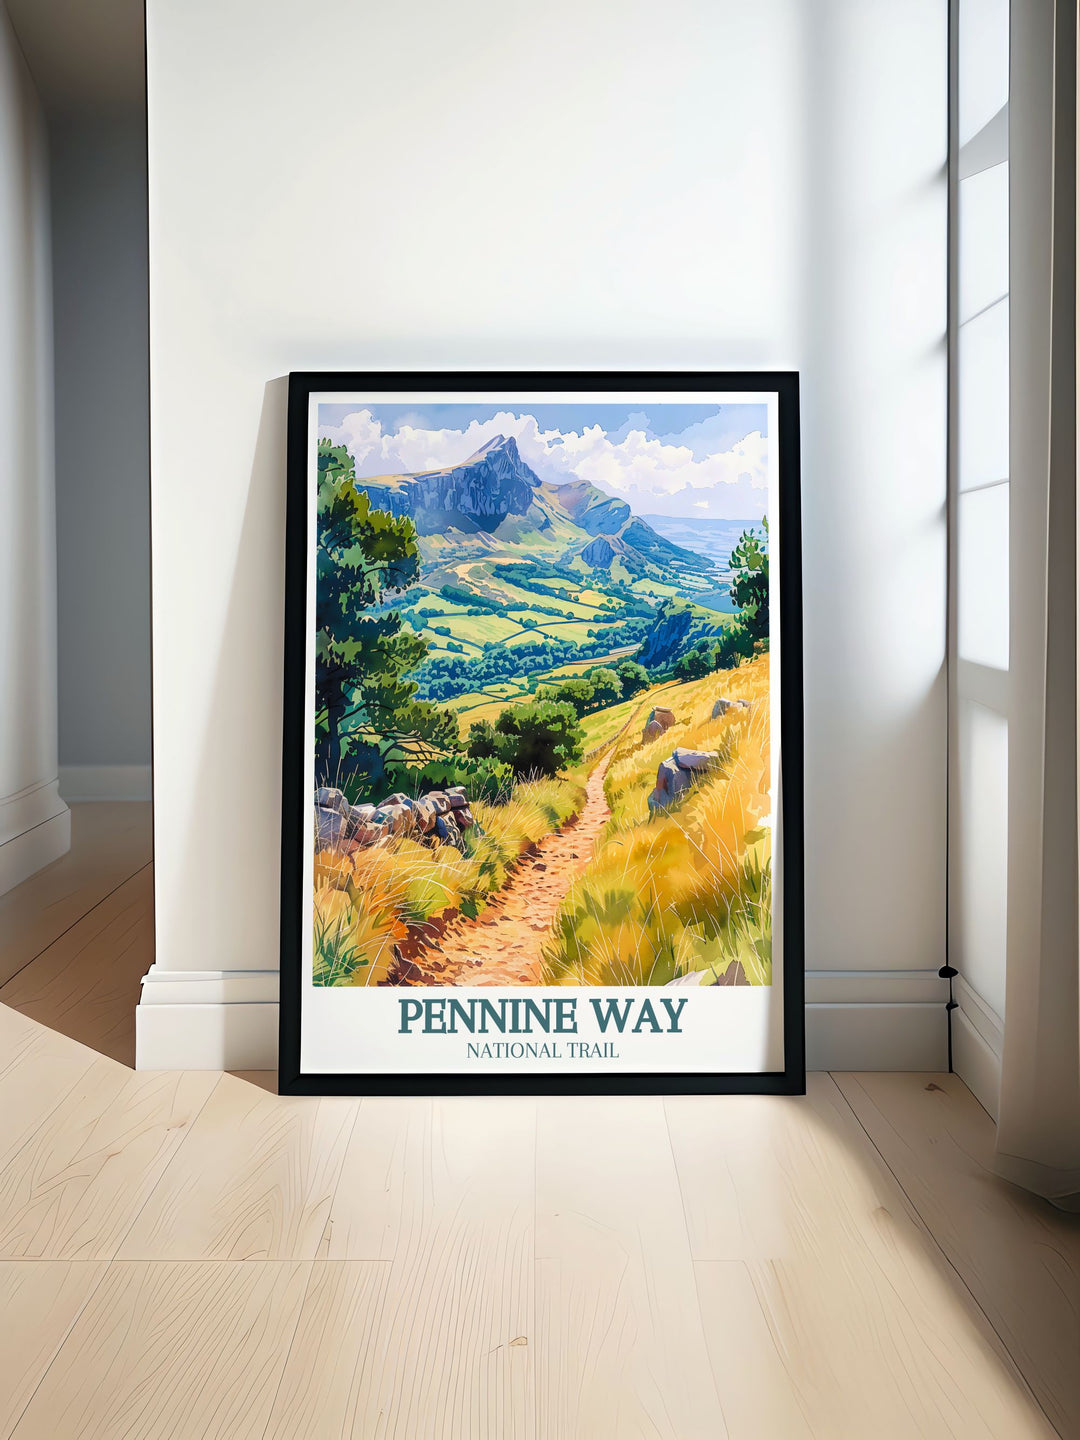 Peak District Print featuring the stunning landscapes of the Pennines capturing the serene beauty and natural charm of the UK National Parks ideal for home decor and nature enthusiasts